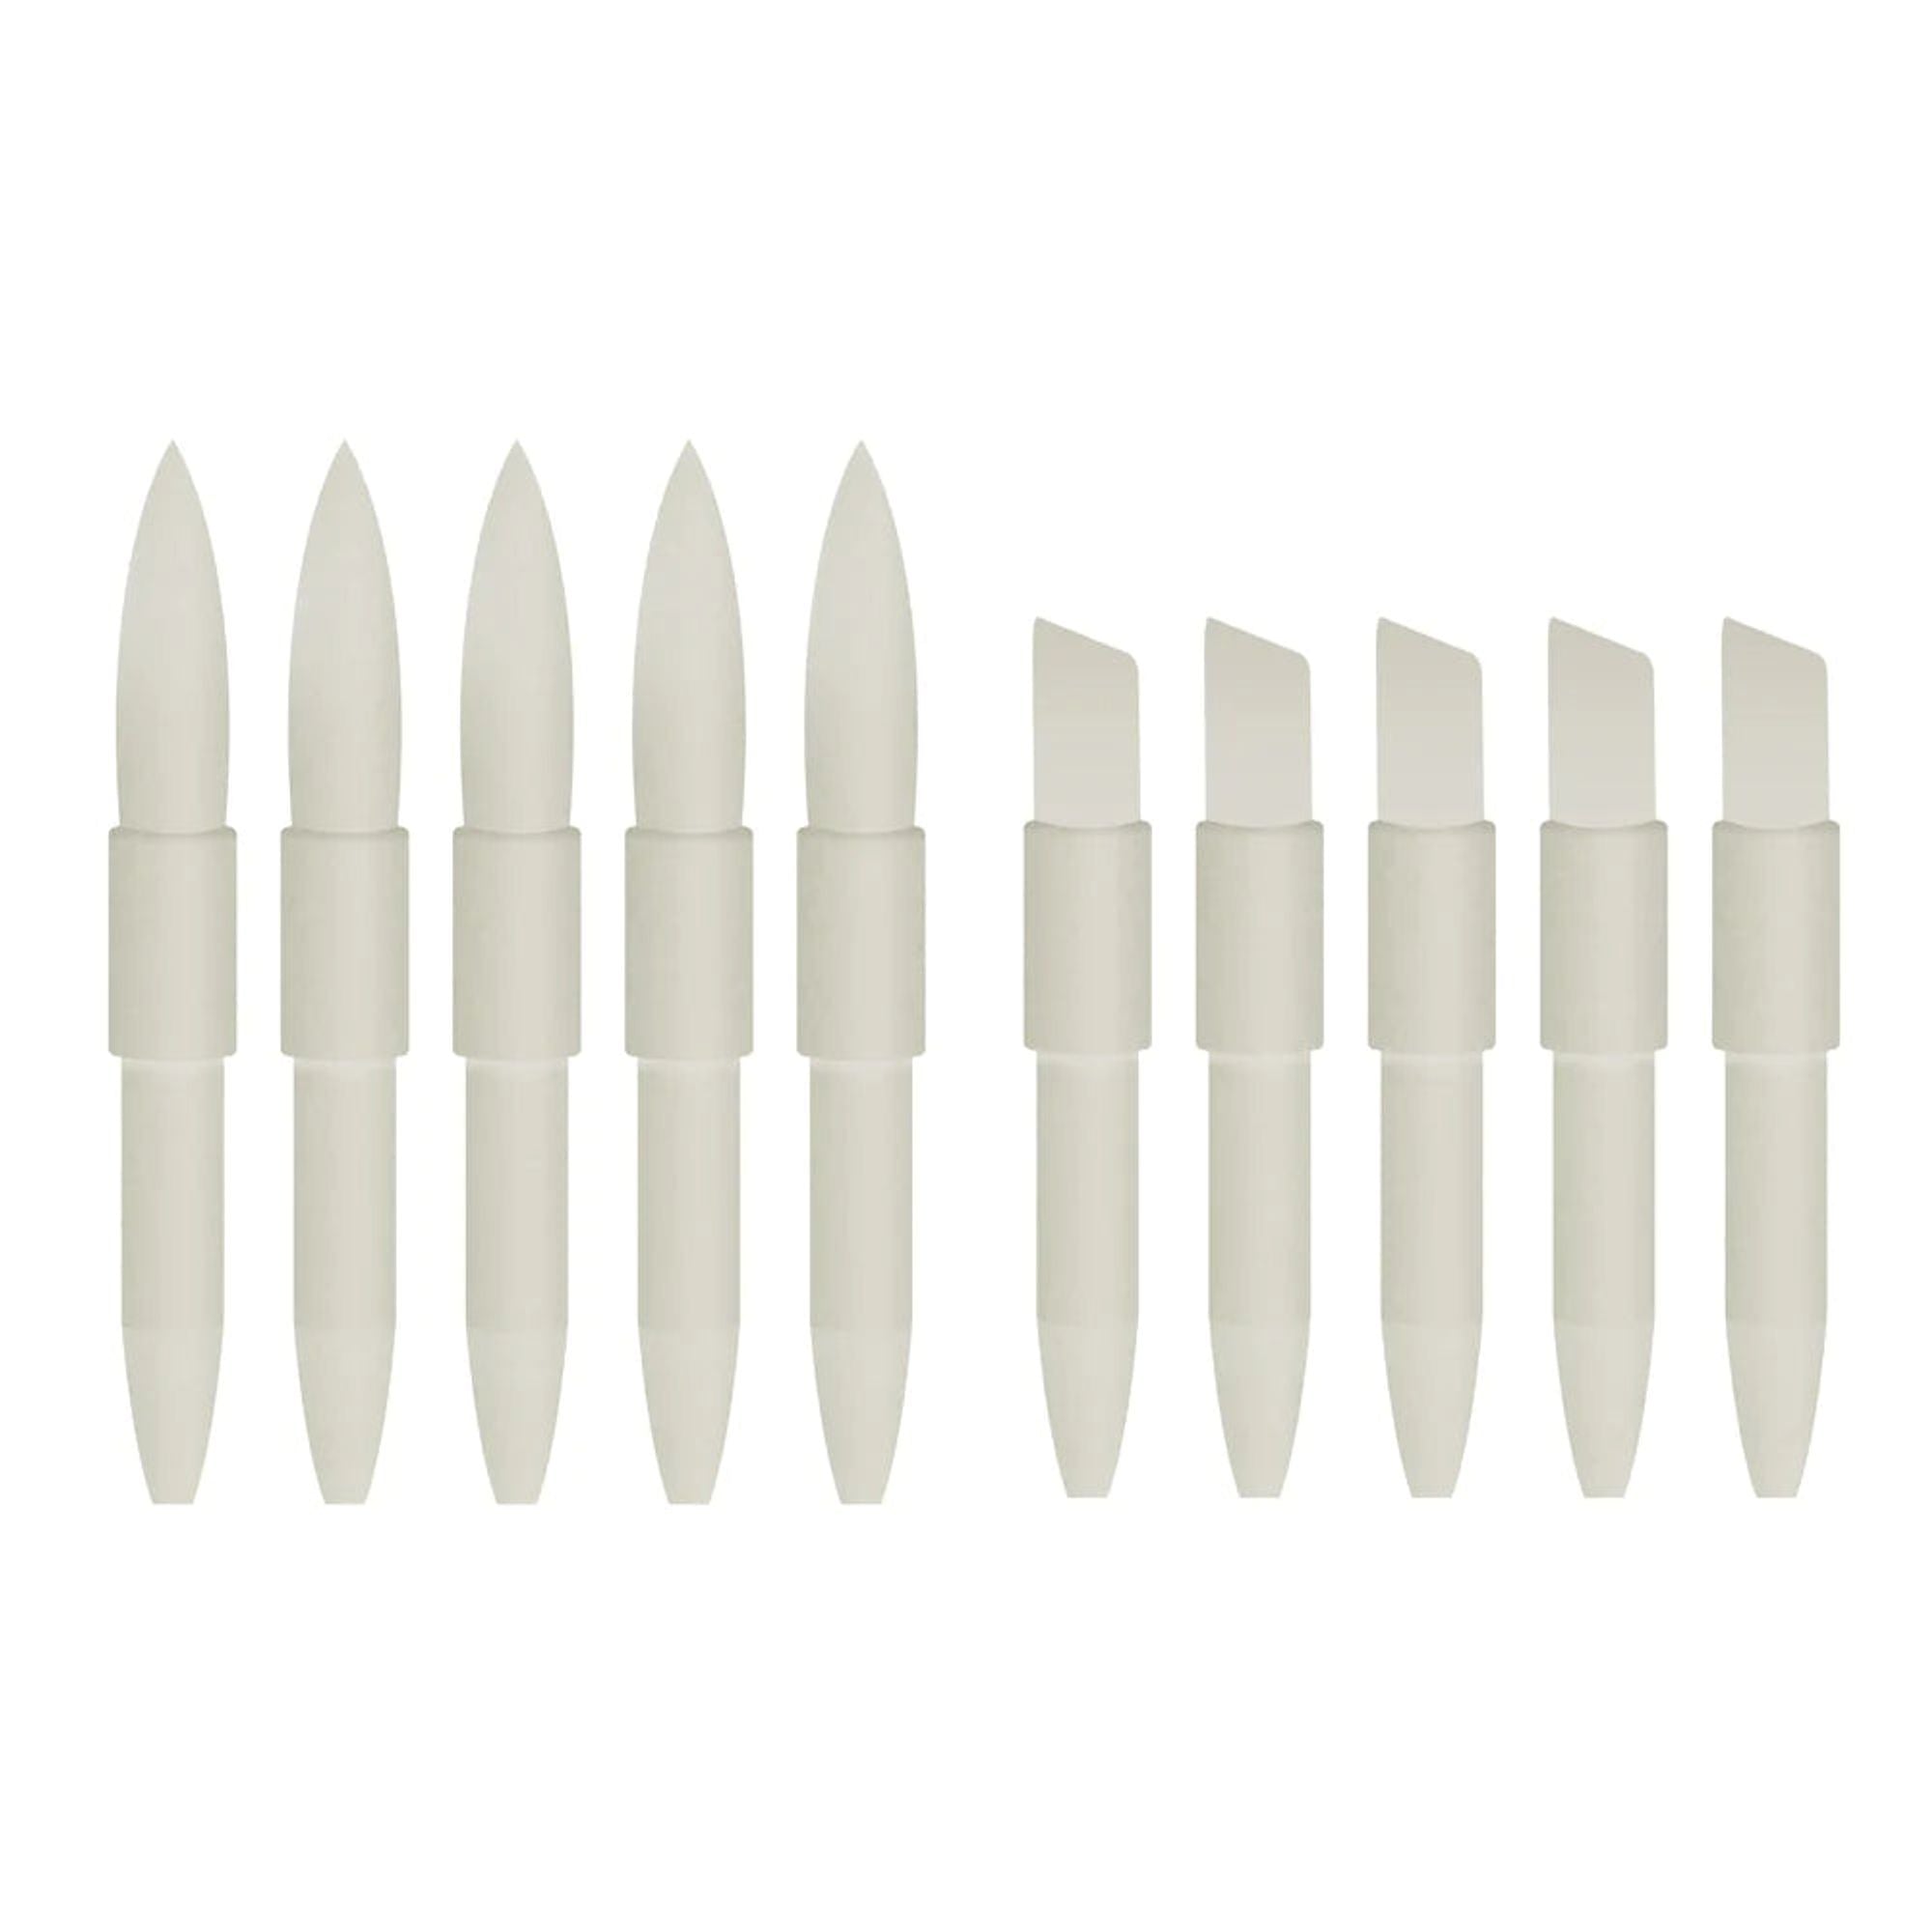 Couture Creations - Twin Tip Ink Marker Replacement Tips (5 Flexible Brush Tips, 5 Firm Chisel Tips)